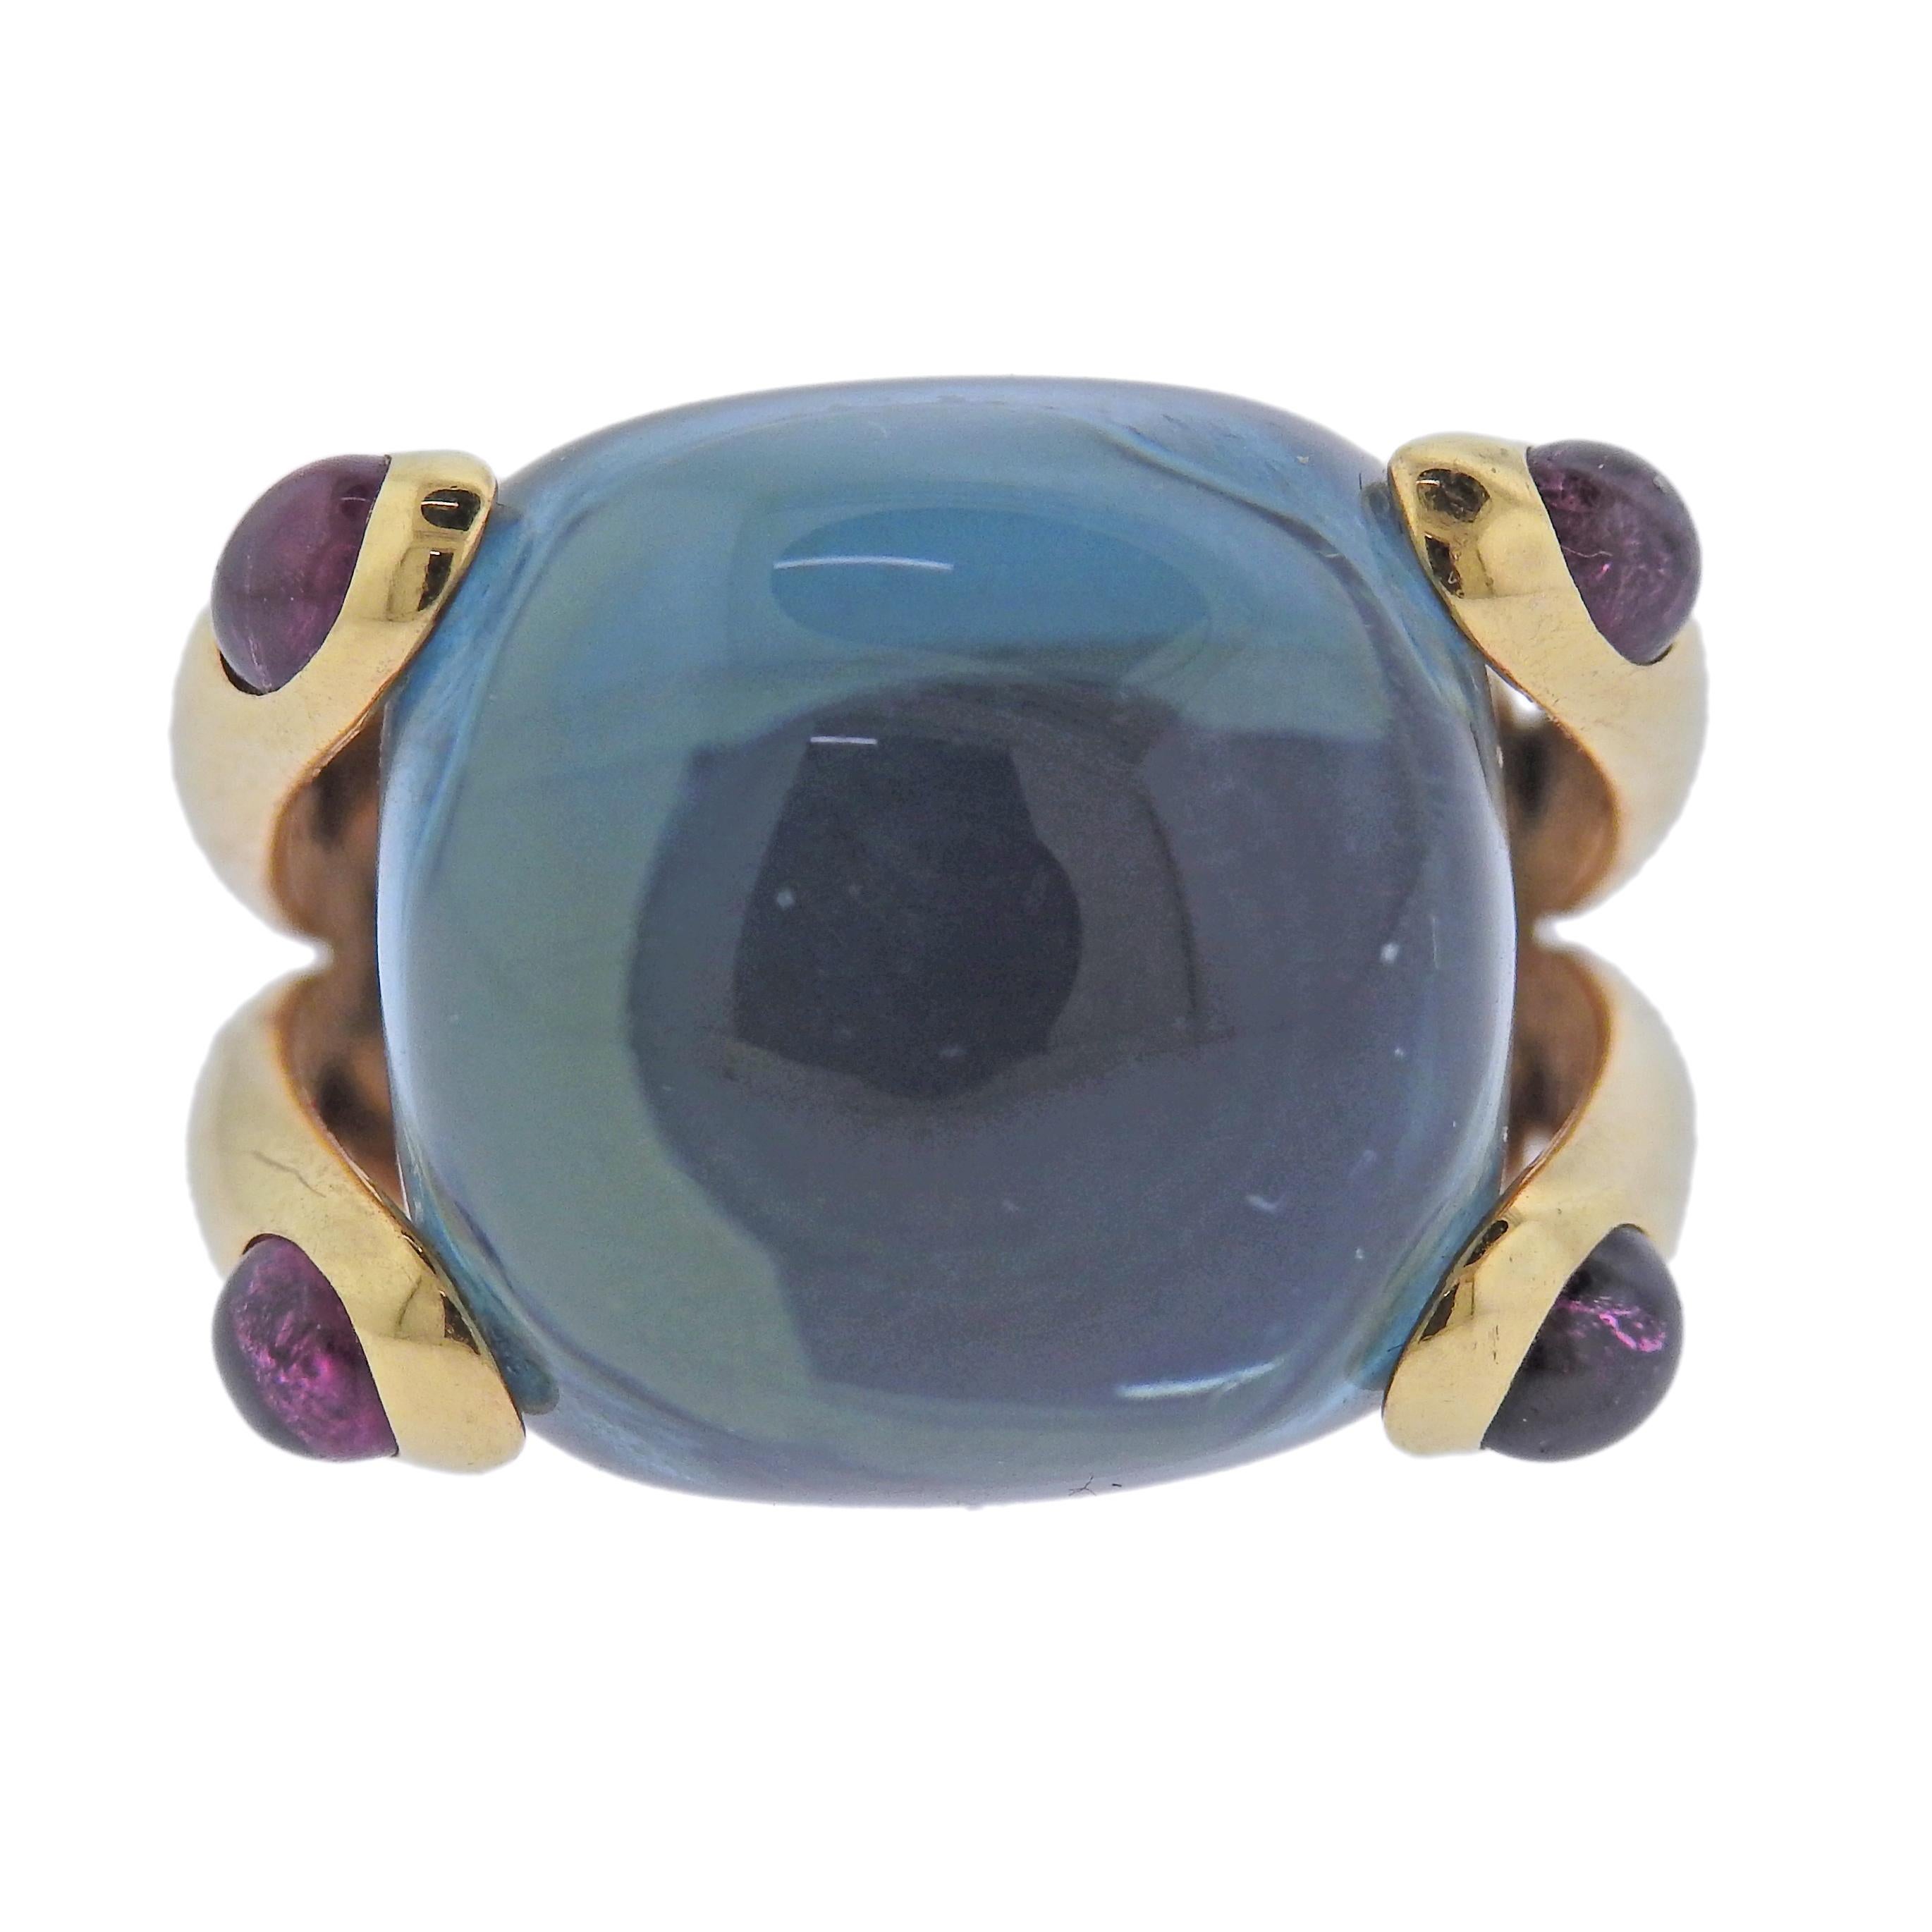 18k gold Candy cocktail ring by Verdura, with blue topaz and pink tourmalines.  Ring size 4 (sizing ball can be removed to increase the size), top is 16mm x 22mm. Marked: Verdura. Weight 16.7 grams.